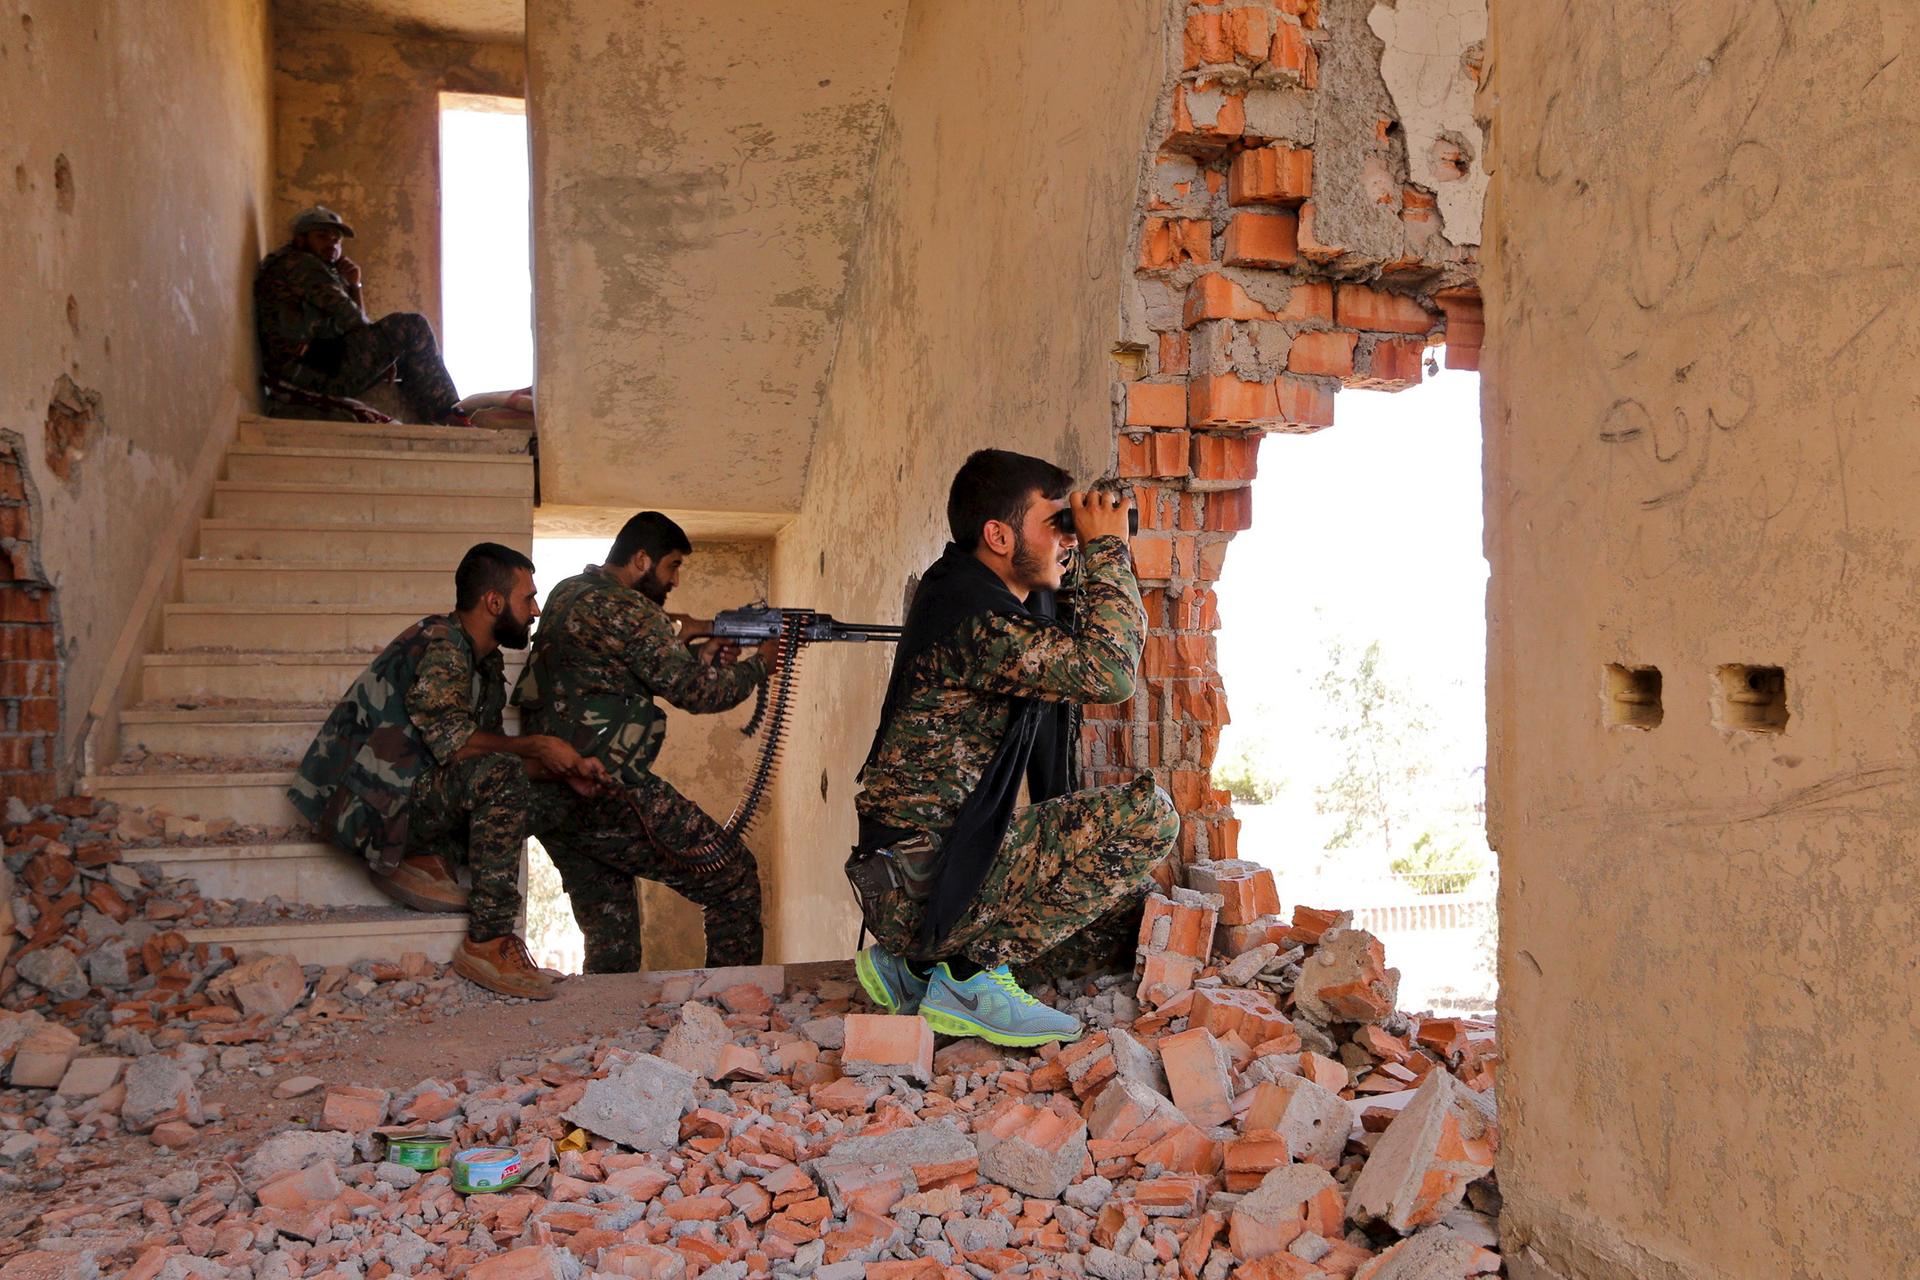 Kurdish People's Protection Units (YPG) fighters take up positions inside a damaged building in al-Vilat al-Homor neighborhood in Hasaka city, as they monitor the movements of Islamic State fighters who are stationed in Ghwayran neighborhood in Hasaka cit